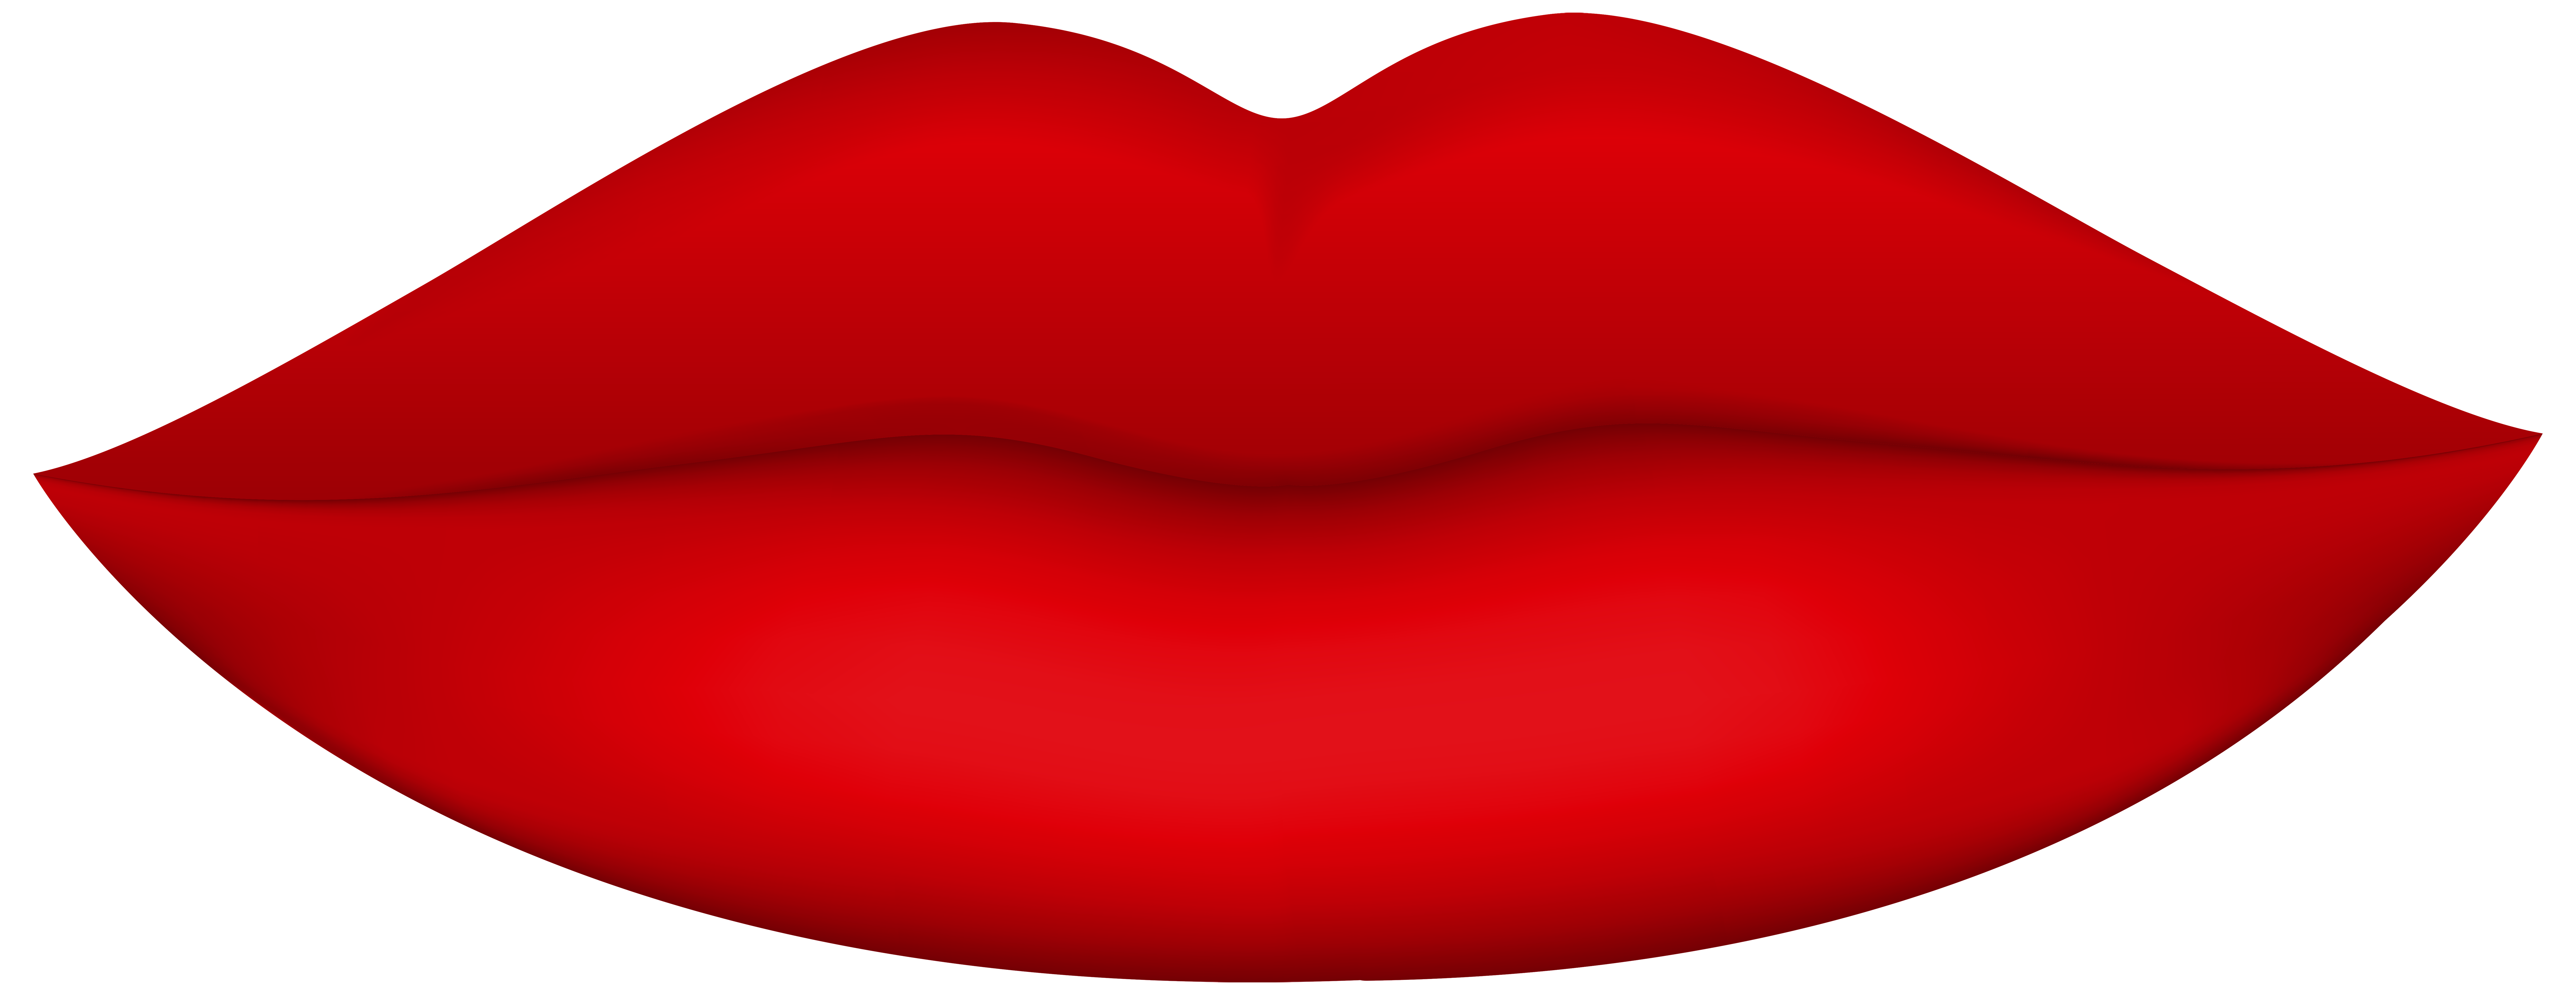 Red Lips Vector Clip Art At C